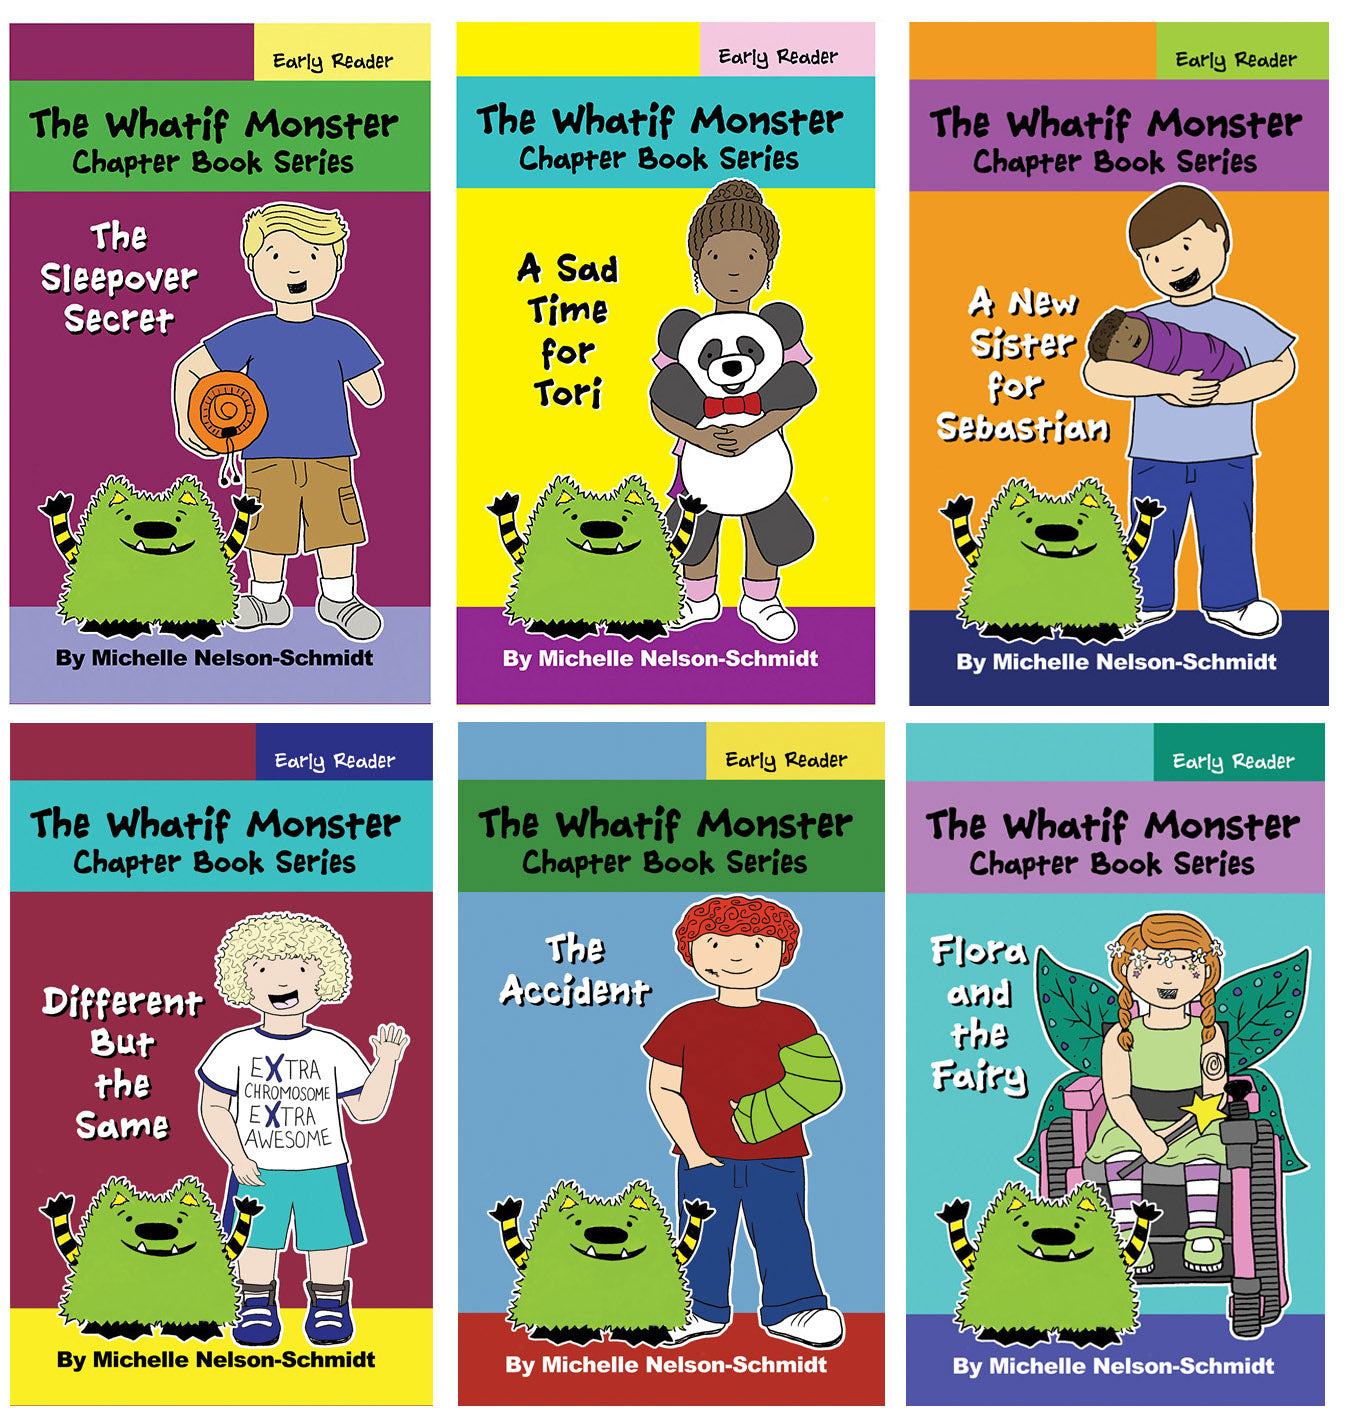 Books 7-12 of The Whatif Monster Chapter Books Series